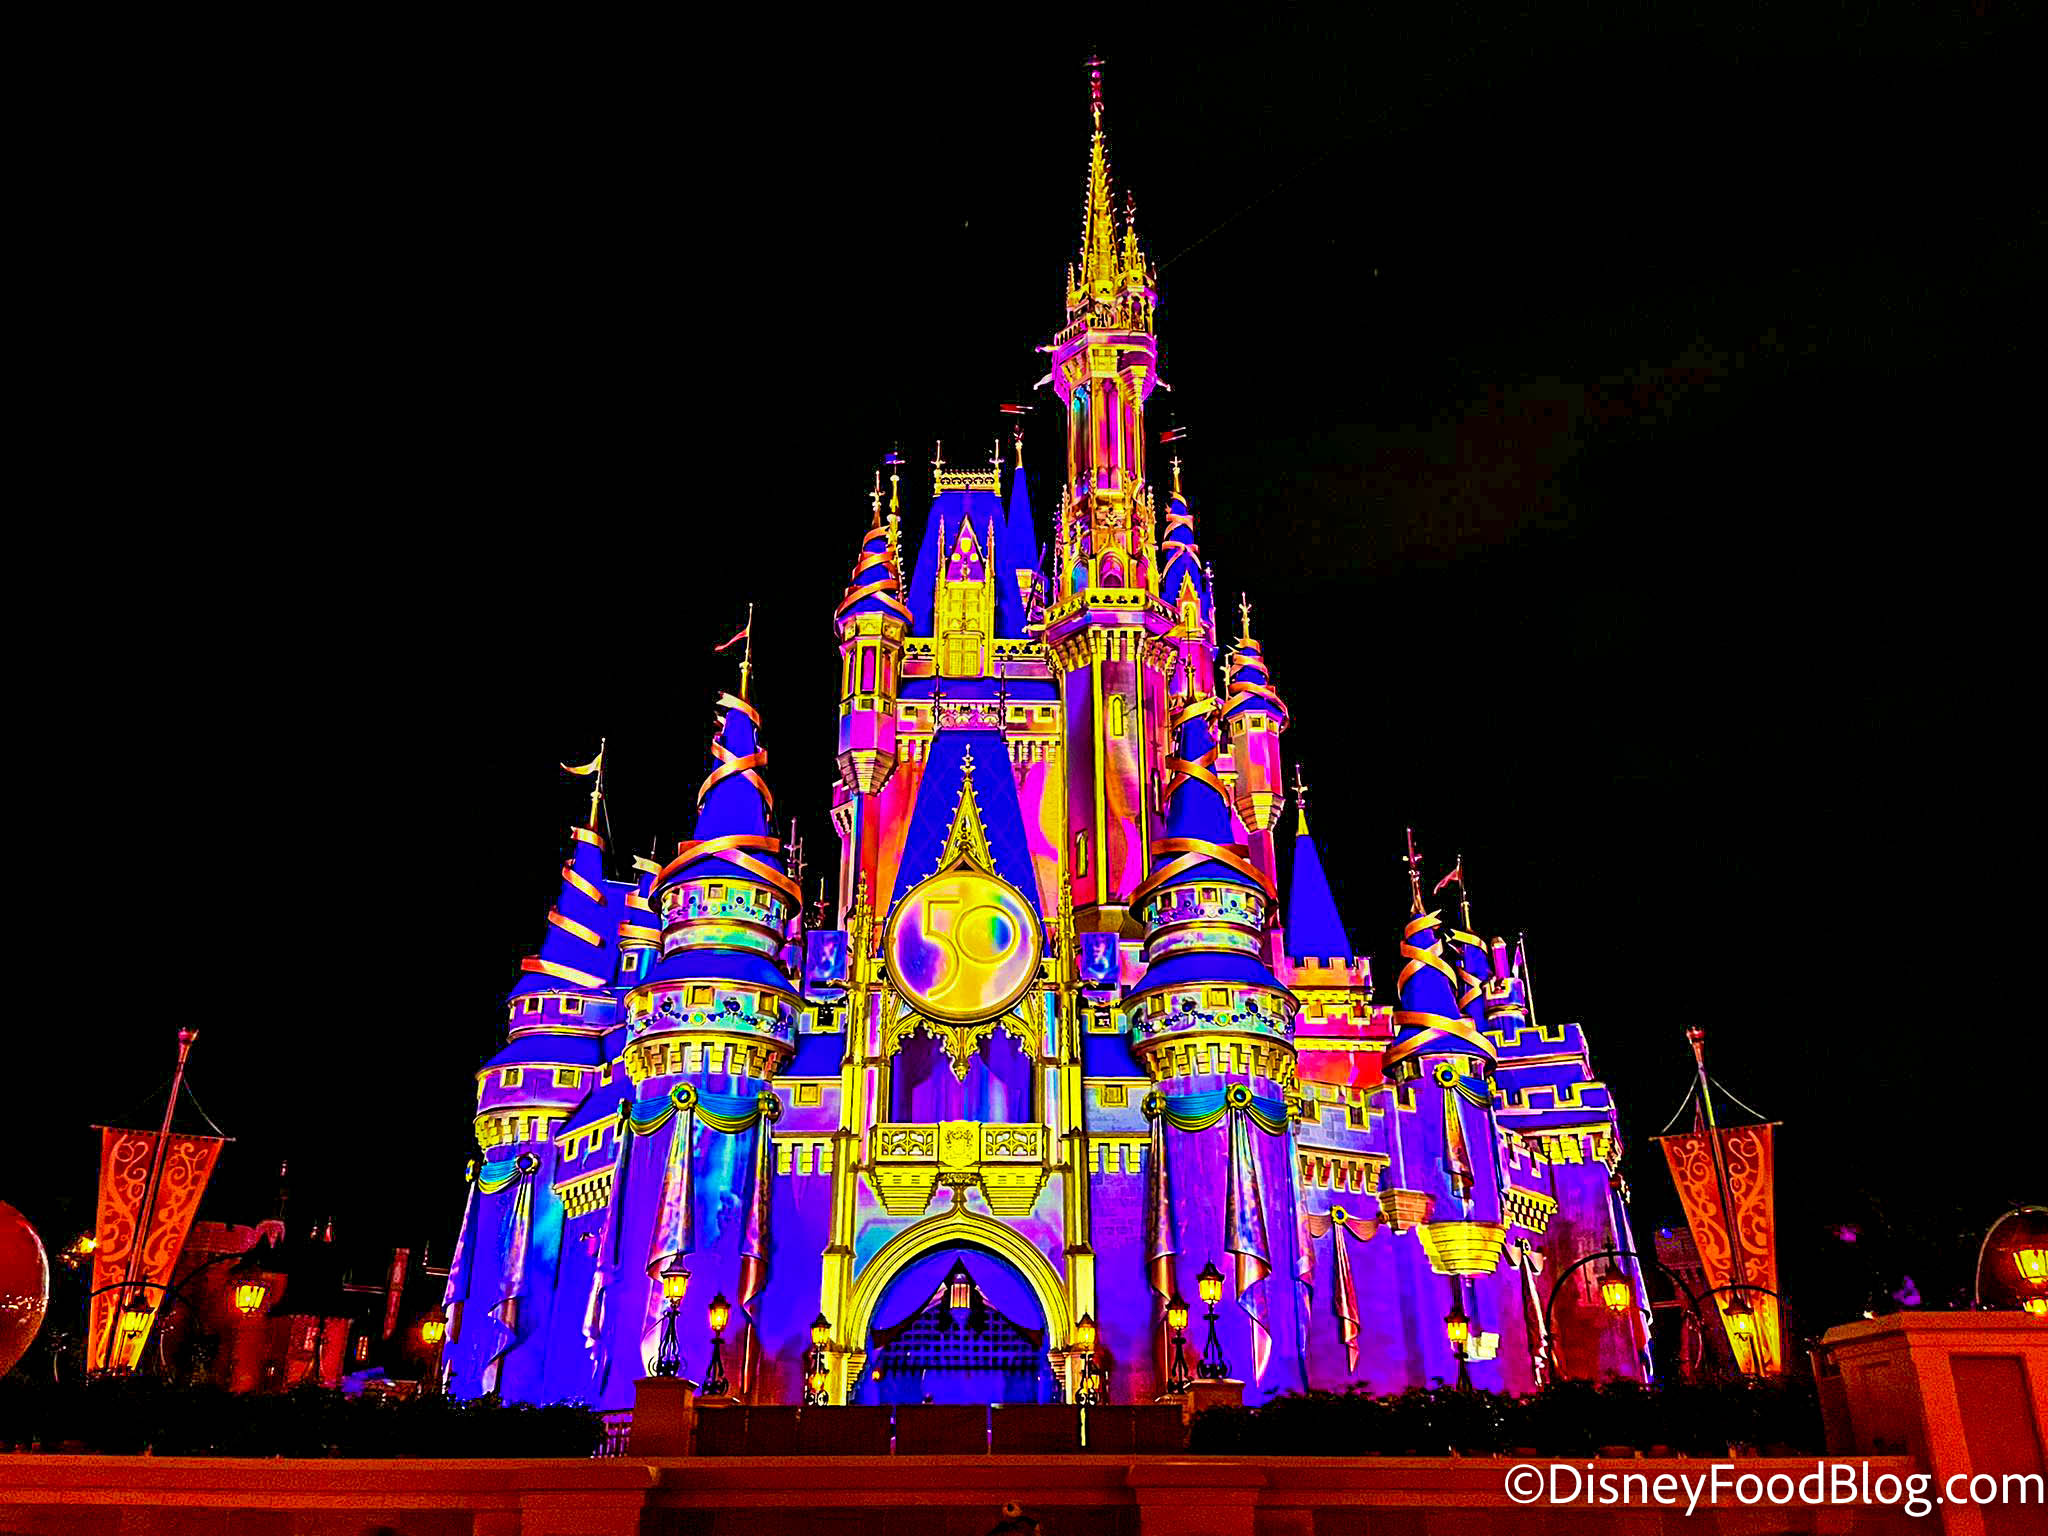 Disney World Wallpapers From DFB